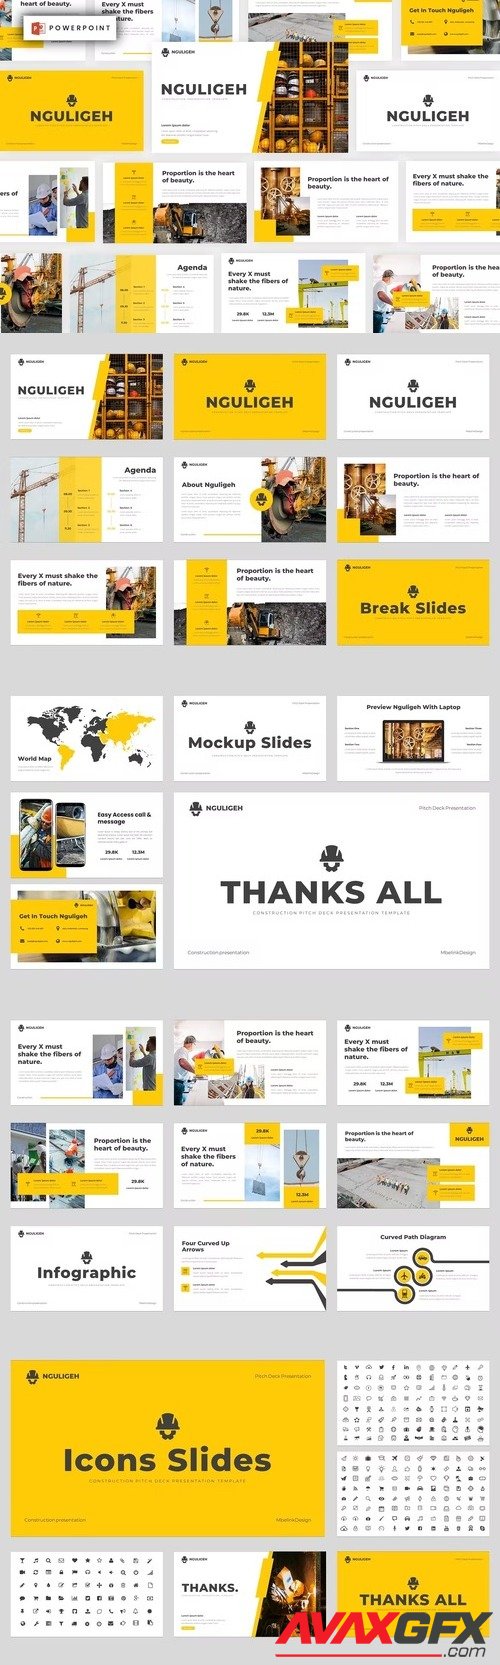 Nguligeh - Construction Powerpoint Template [PPTX]